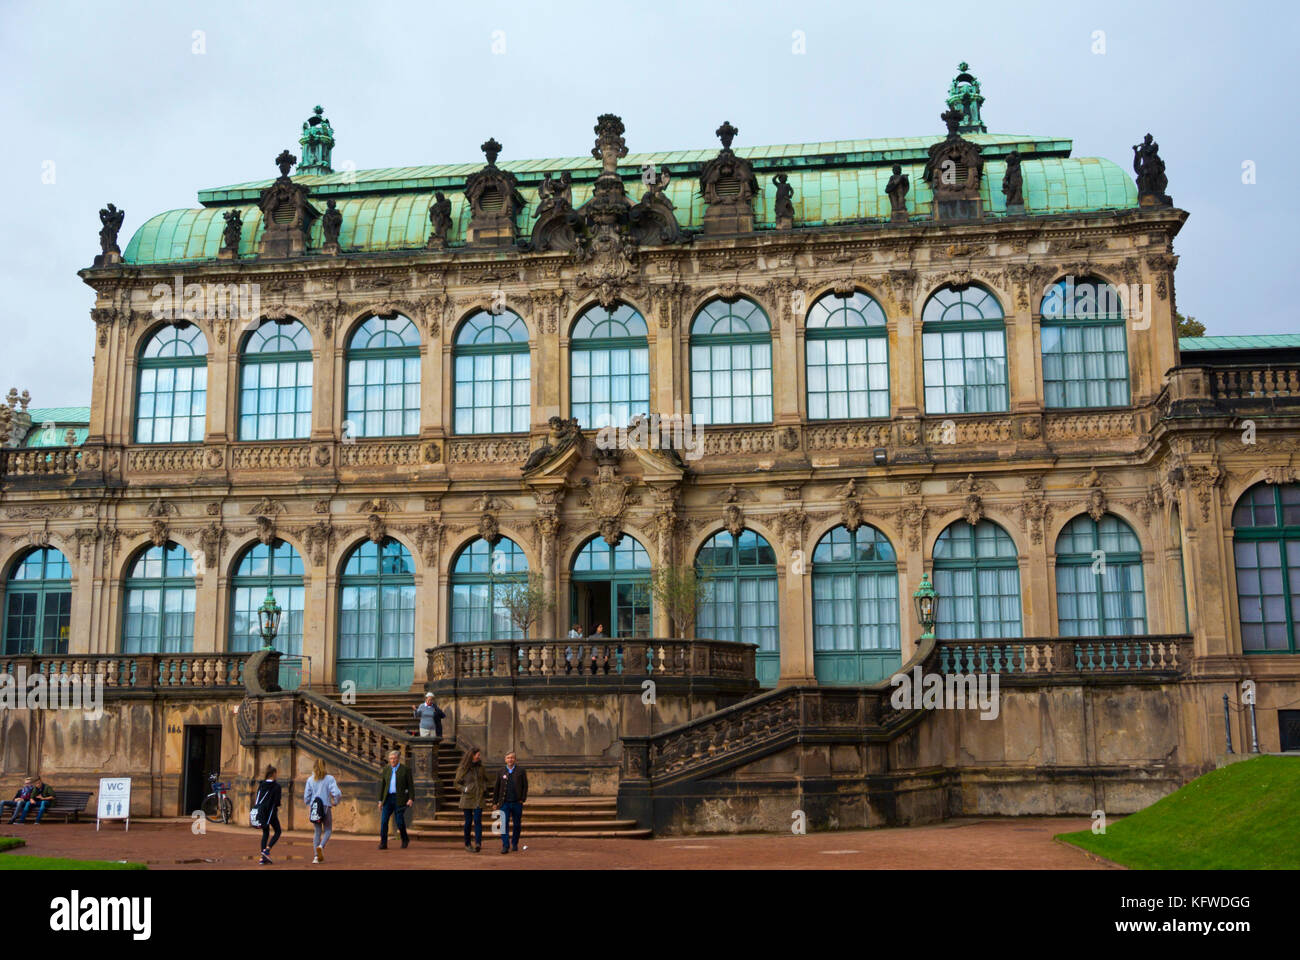 Nymphenbad, museum, Zwinger, Dresden, Saxony, Germany Stock Photo